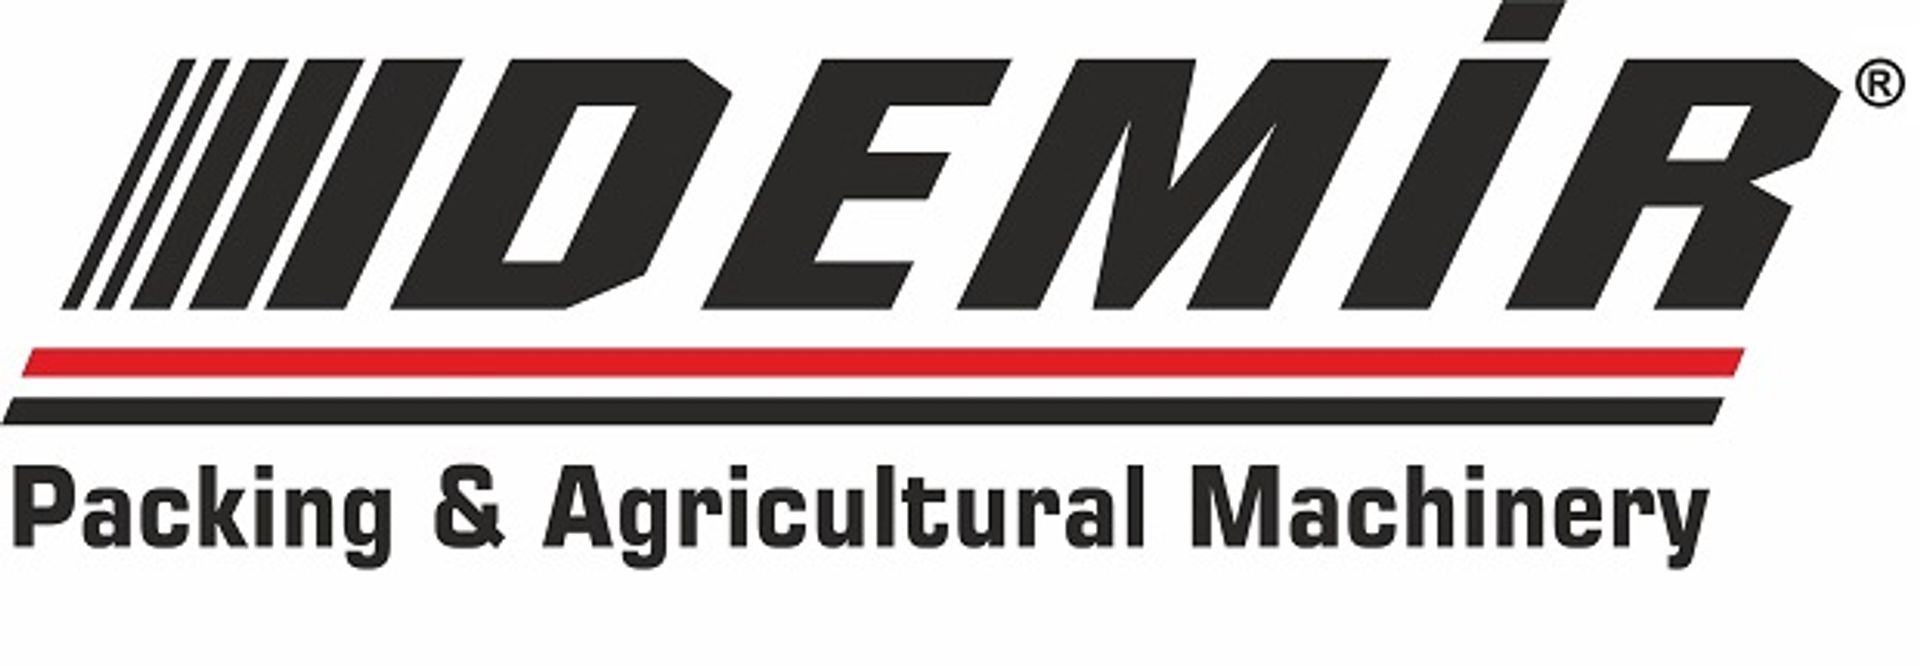 Demir Packing & Agricultural Machinery